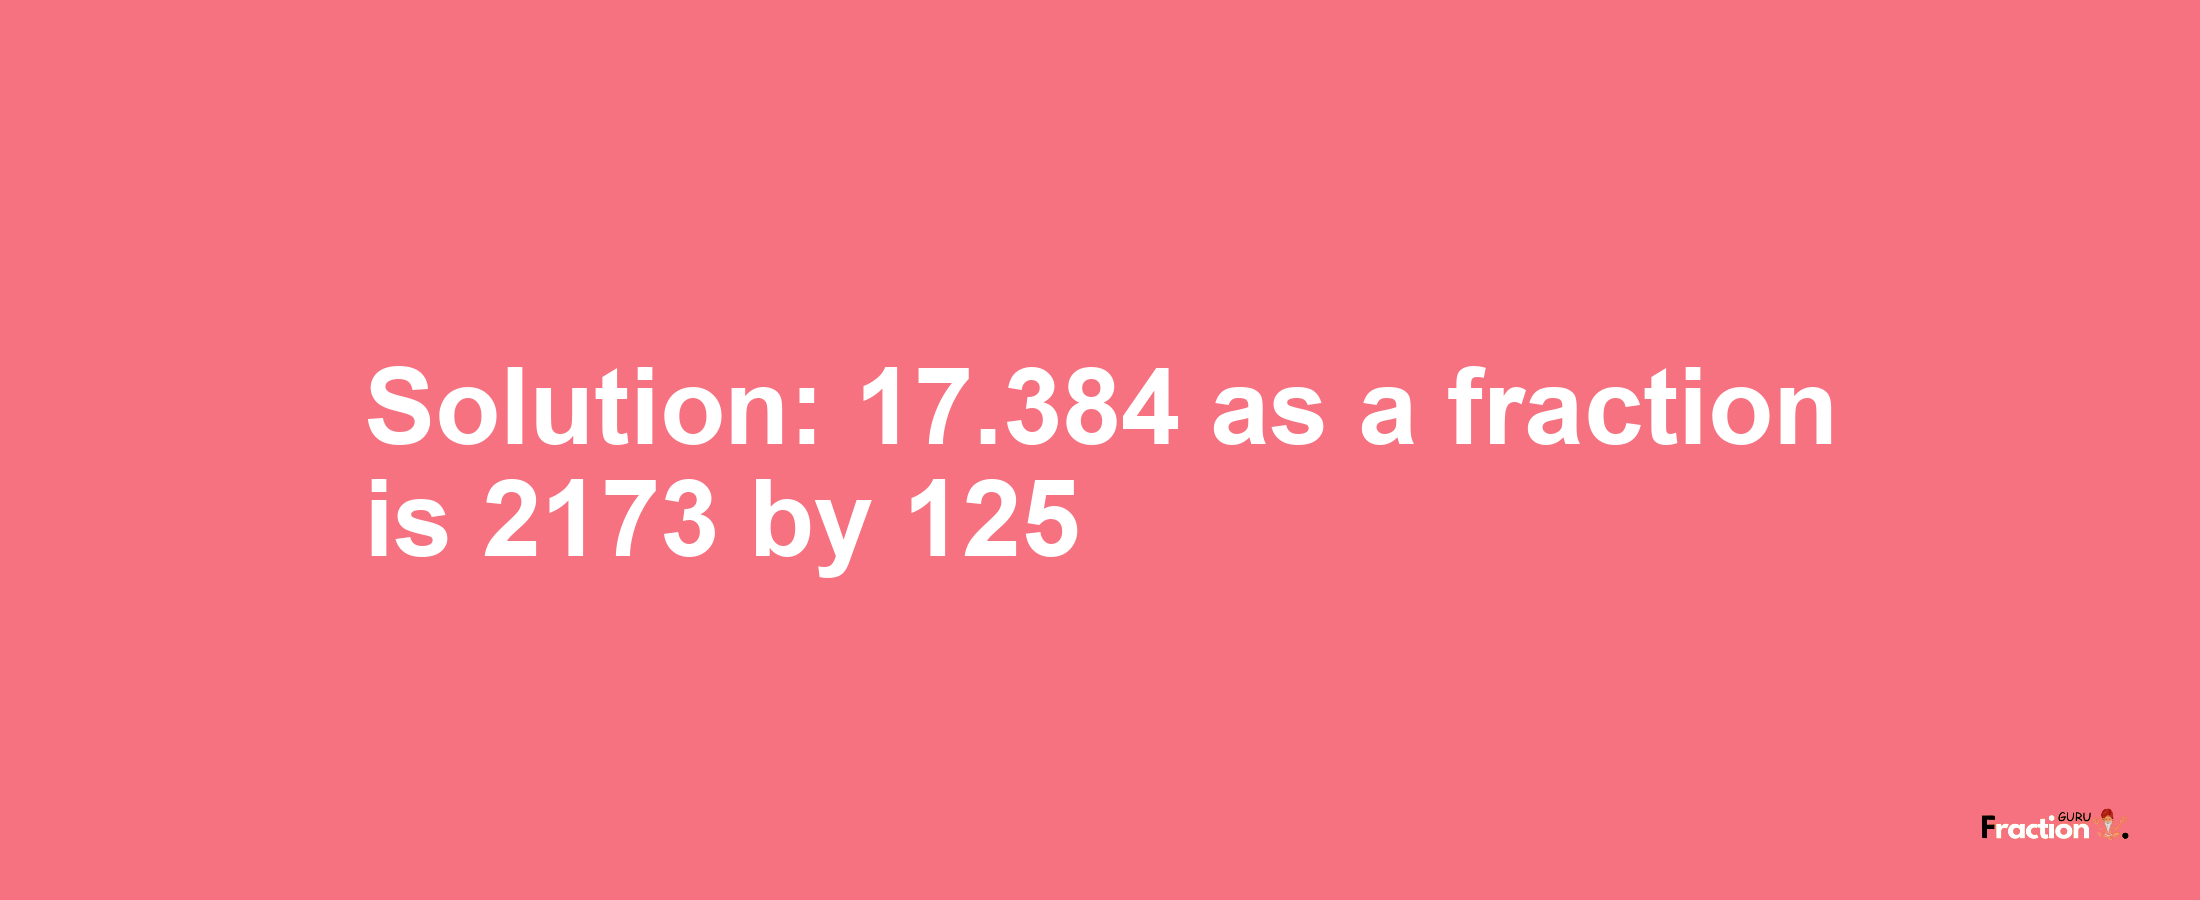 Solution:17.384 as a fraction is 2173/125